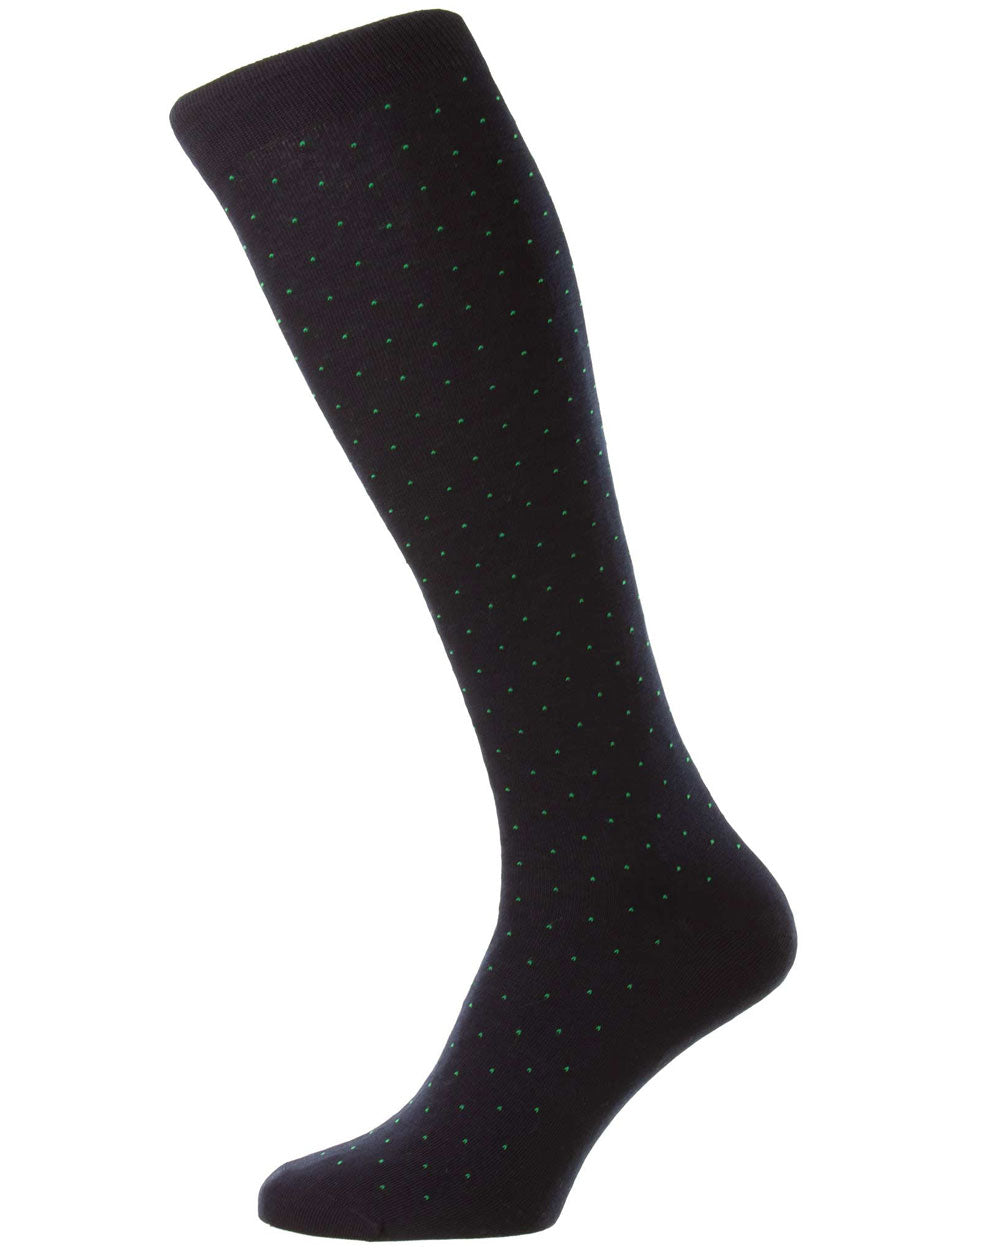 Gadsbury Cotton Over the Calf Socks in Navy